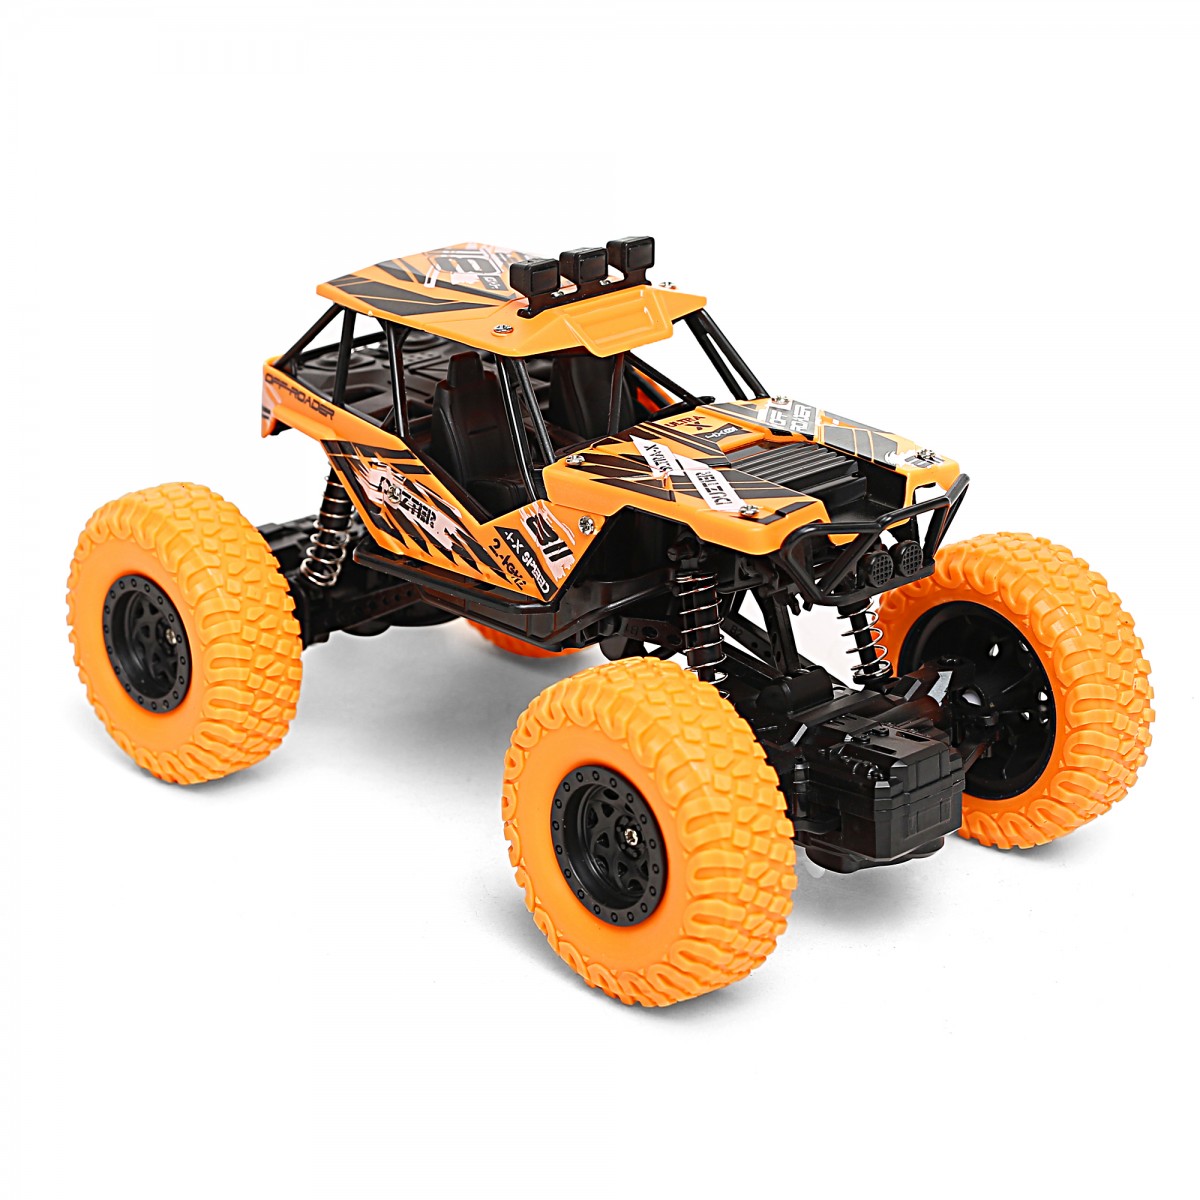 Ralleyz 1:20 Off Road Rc Car With 2.4 Ghz Remote Control 3.7V Rechargeable Battery Red 4Y+